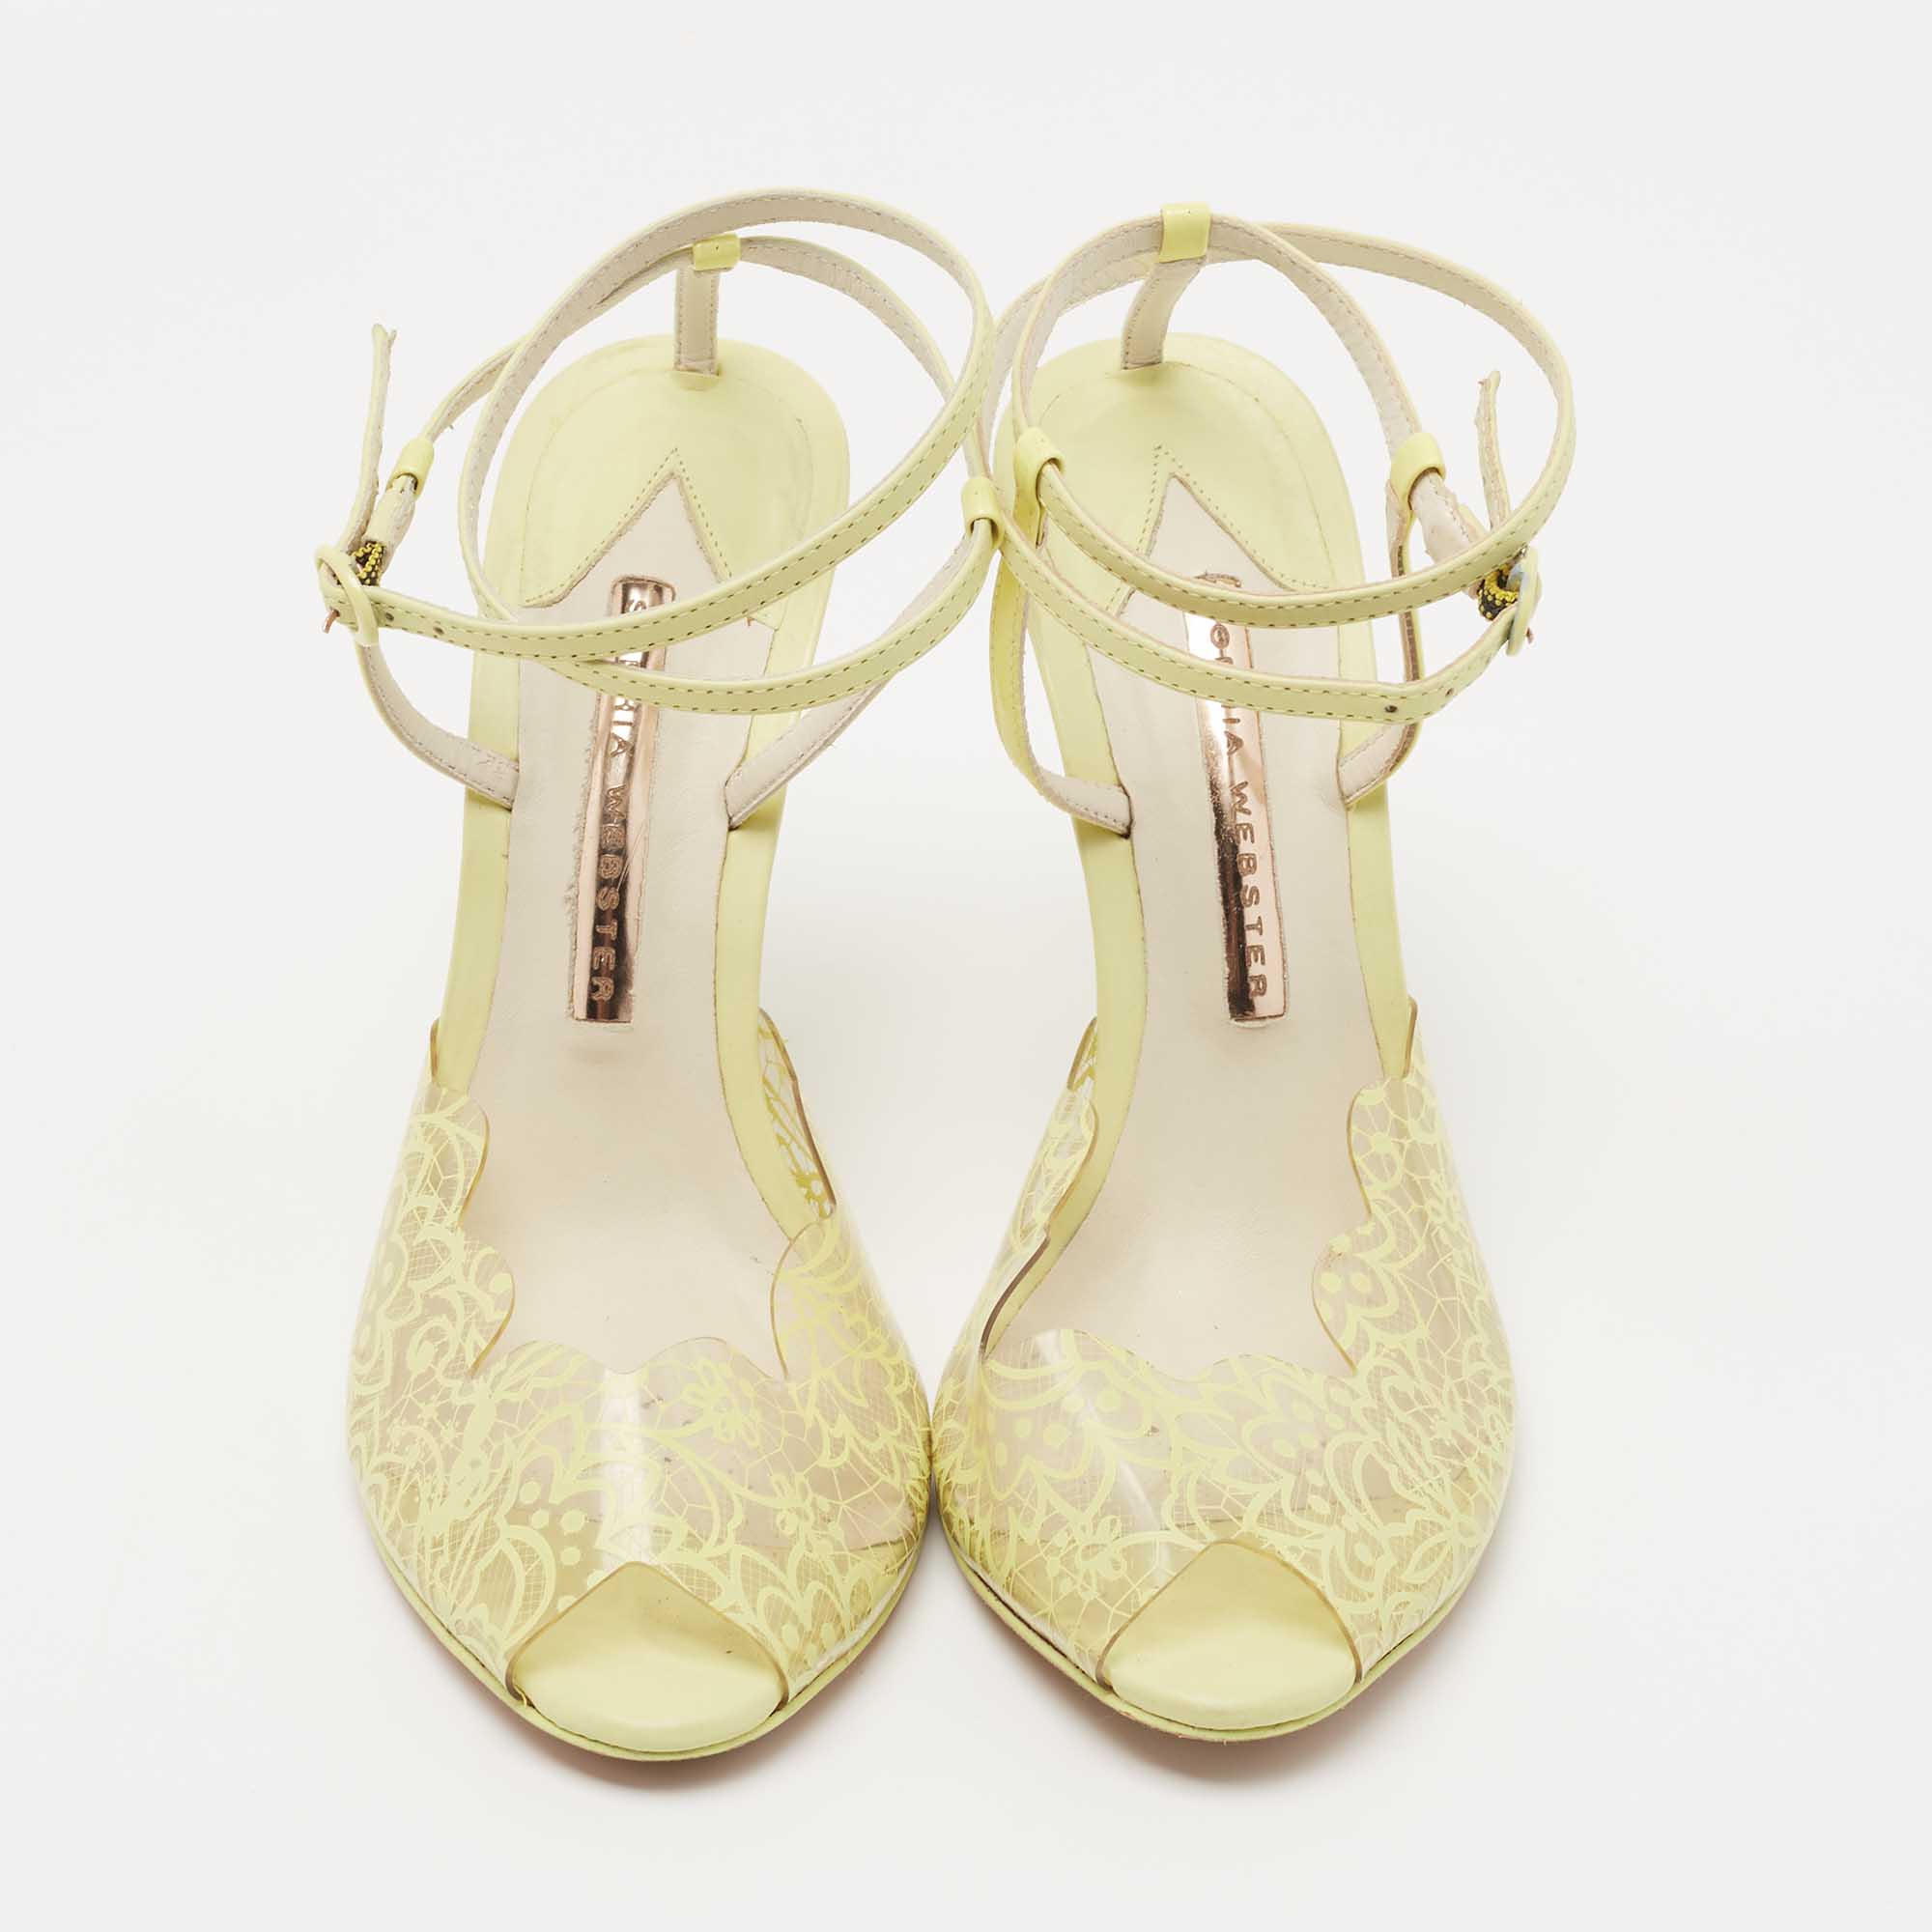 Sophia Webster Yellow Leather And Lace Print PVC Peep Toe Ankle Strap Sandals Size 37